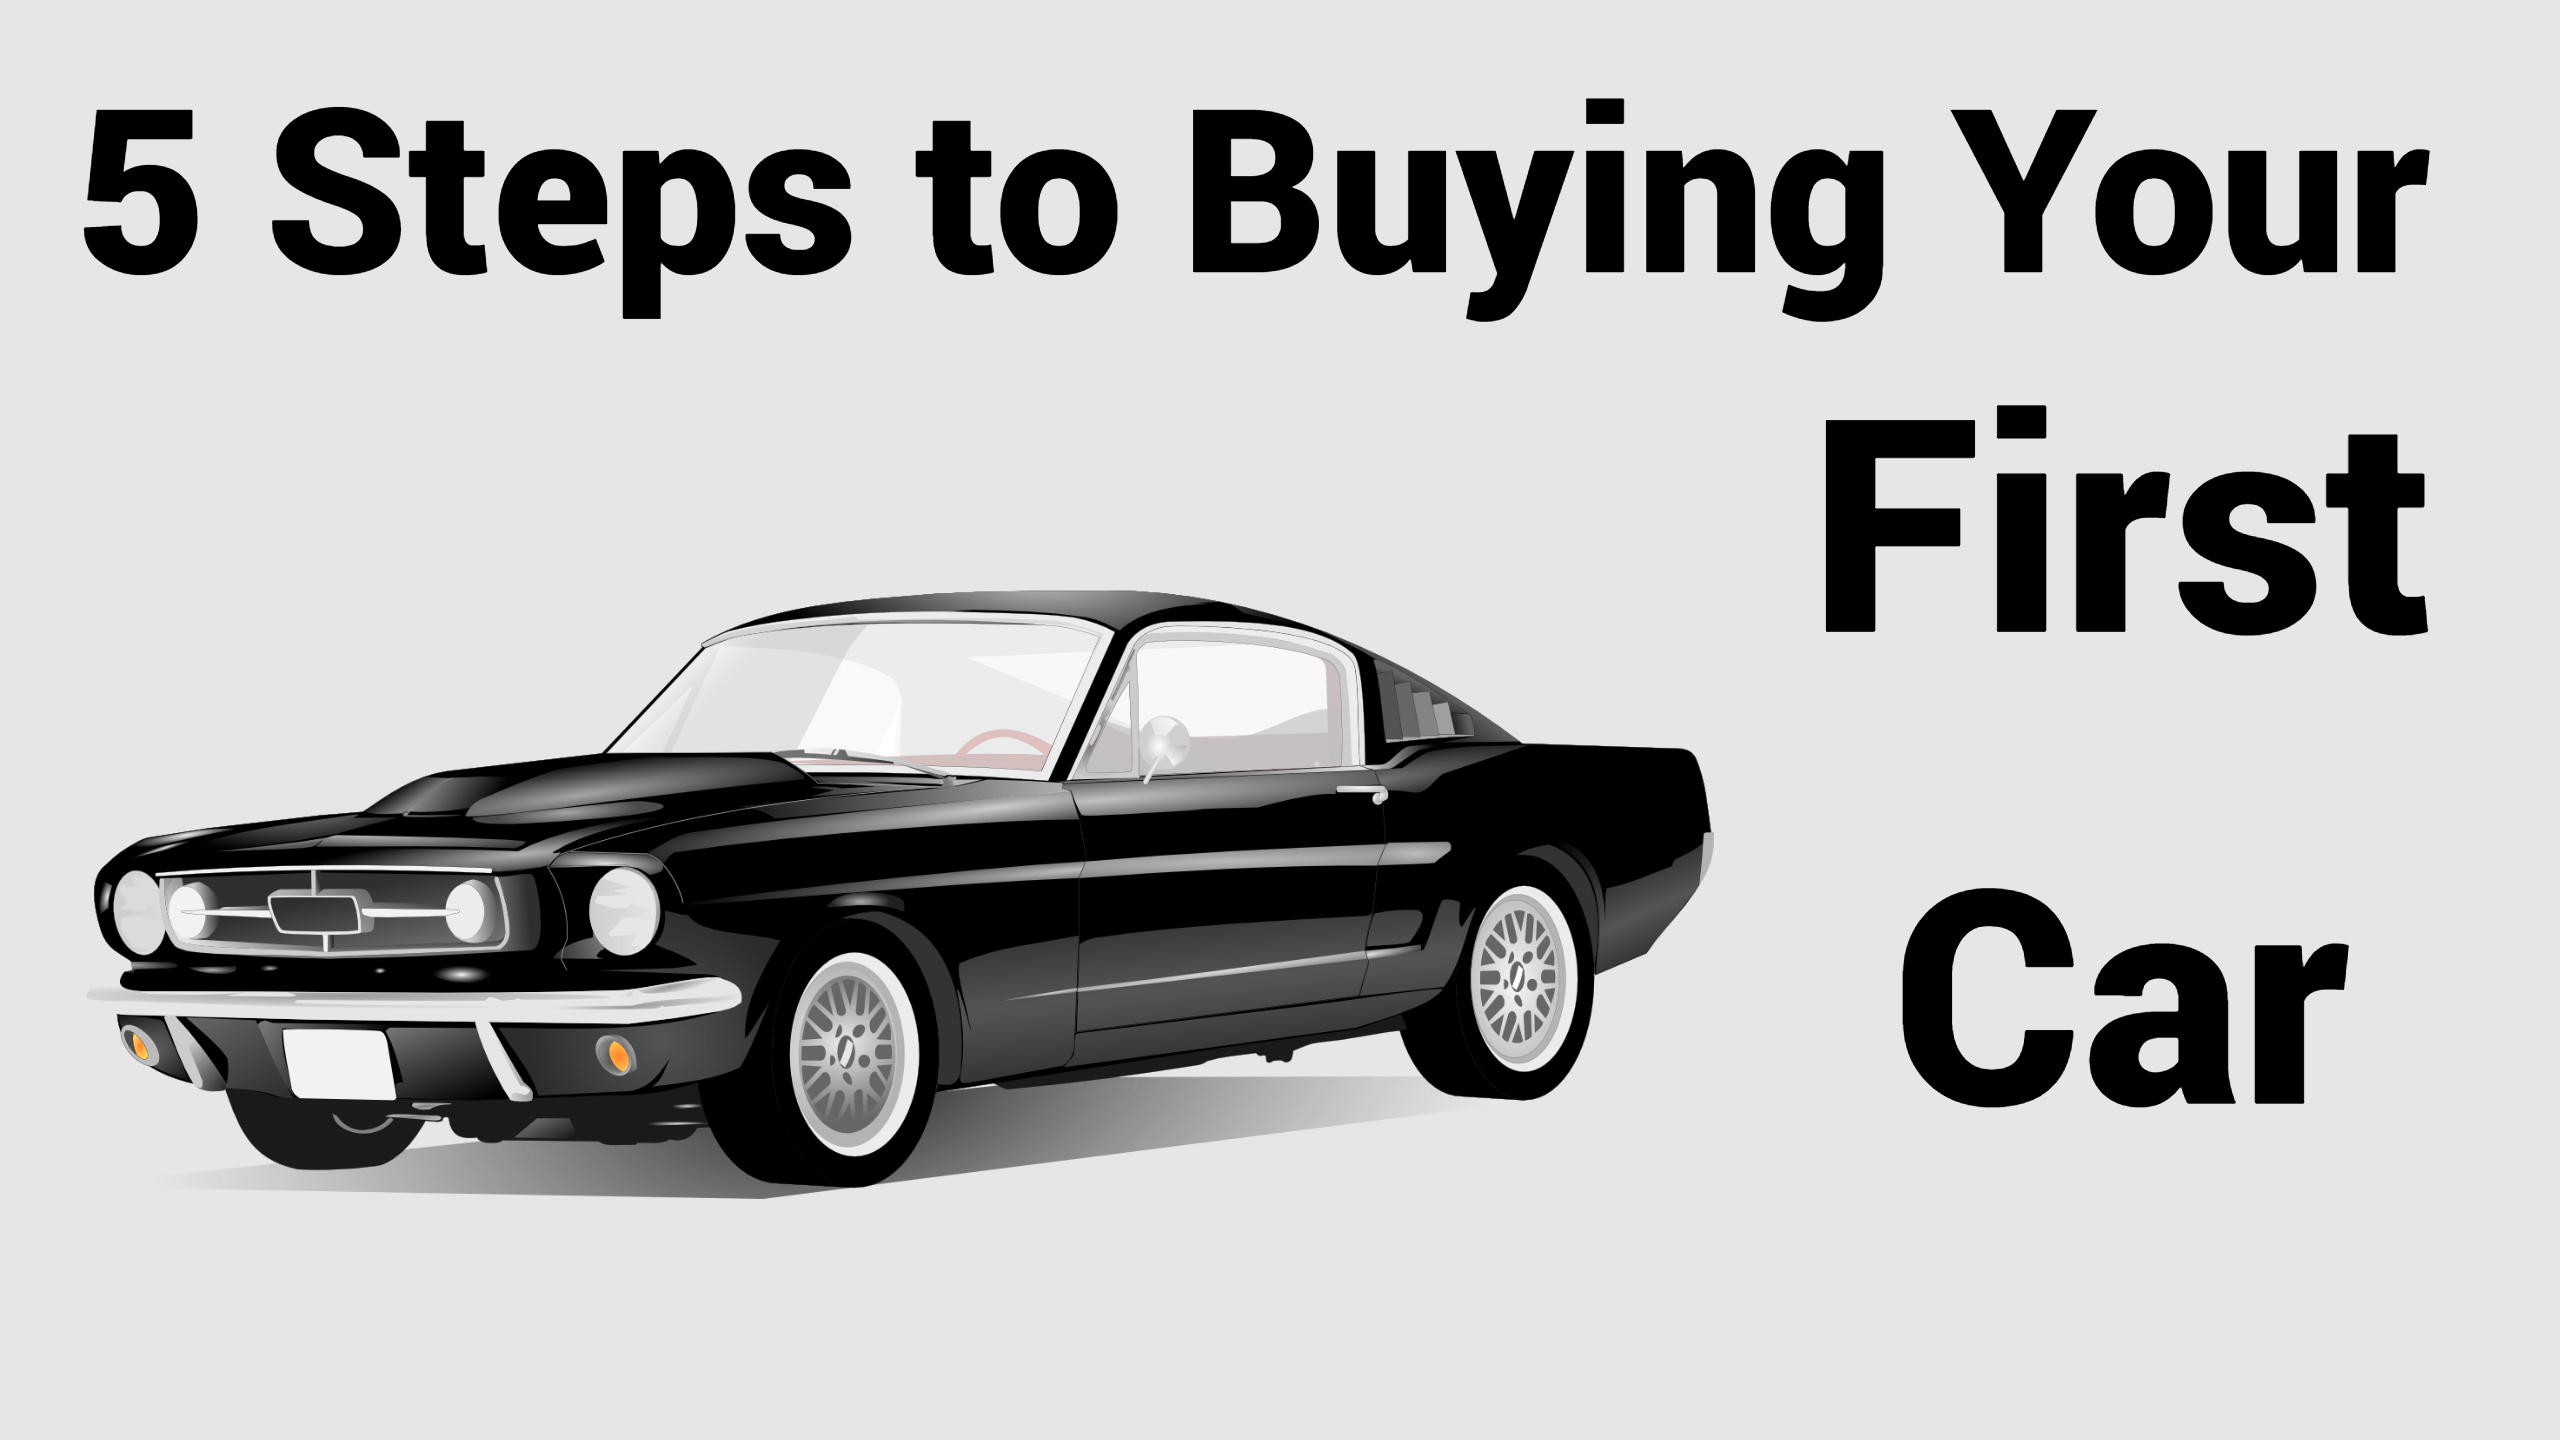 5 Steps to Buying Your First Car: A blog about how to buy your first car